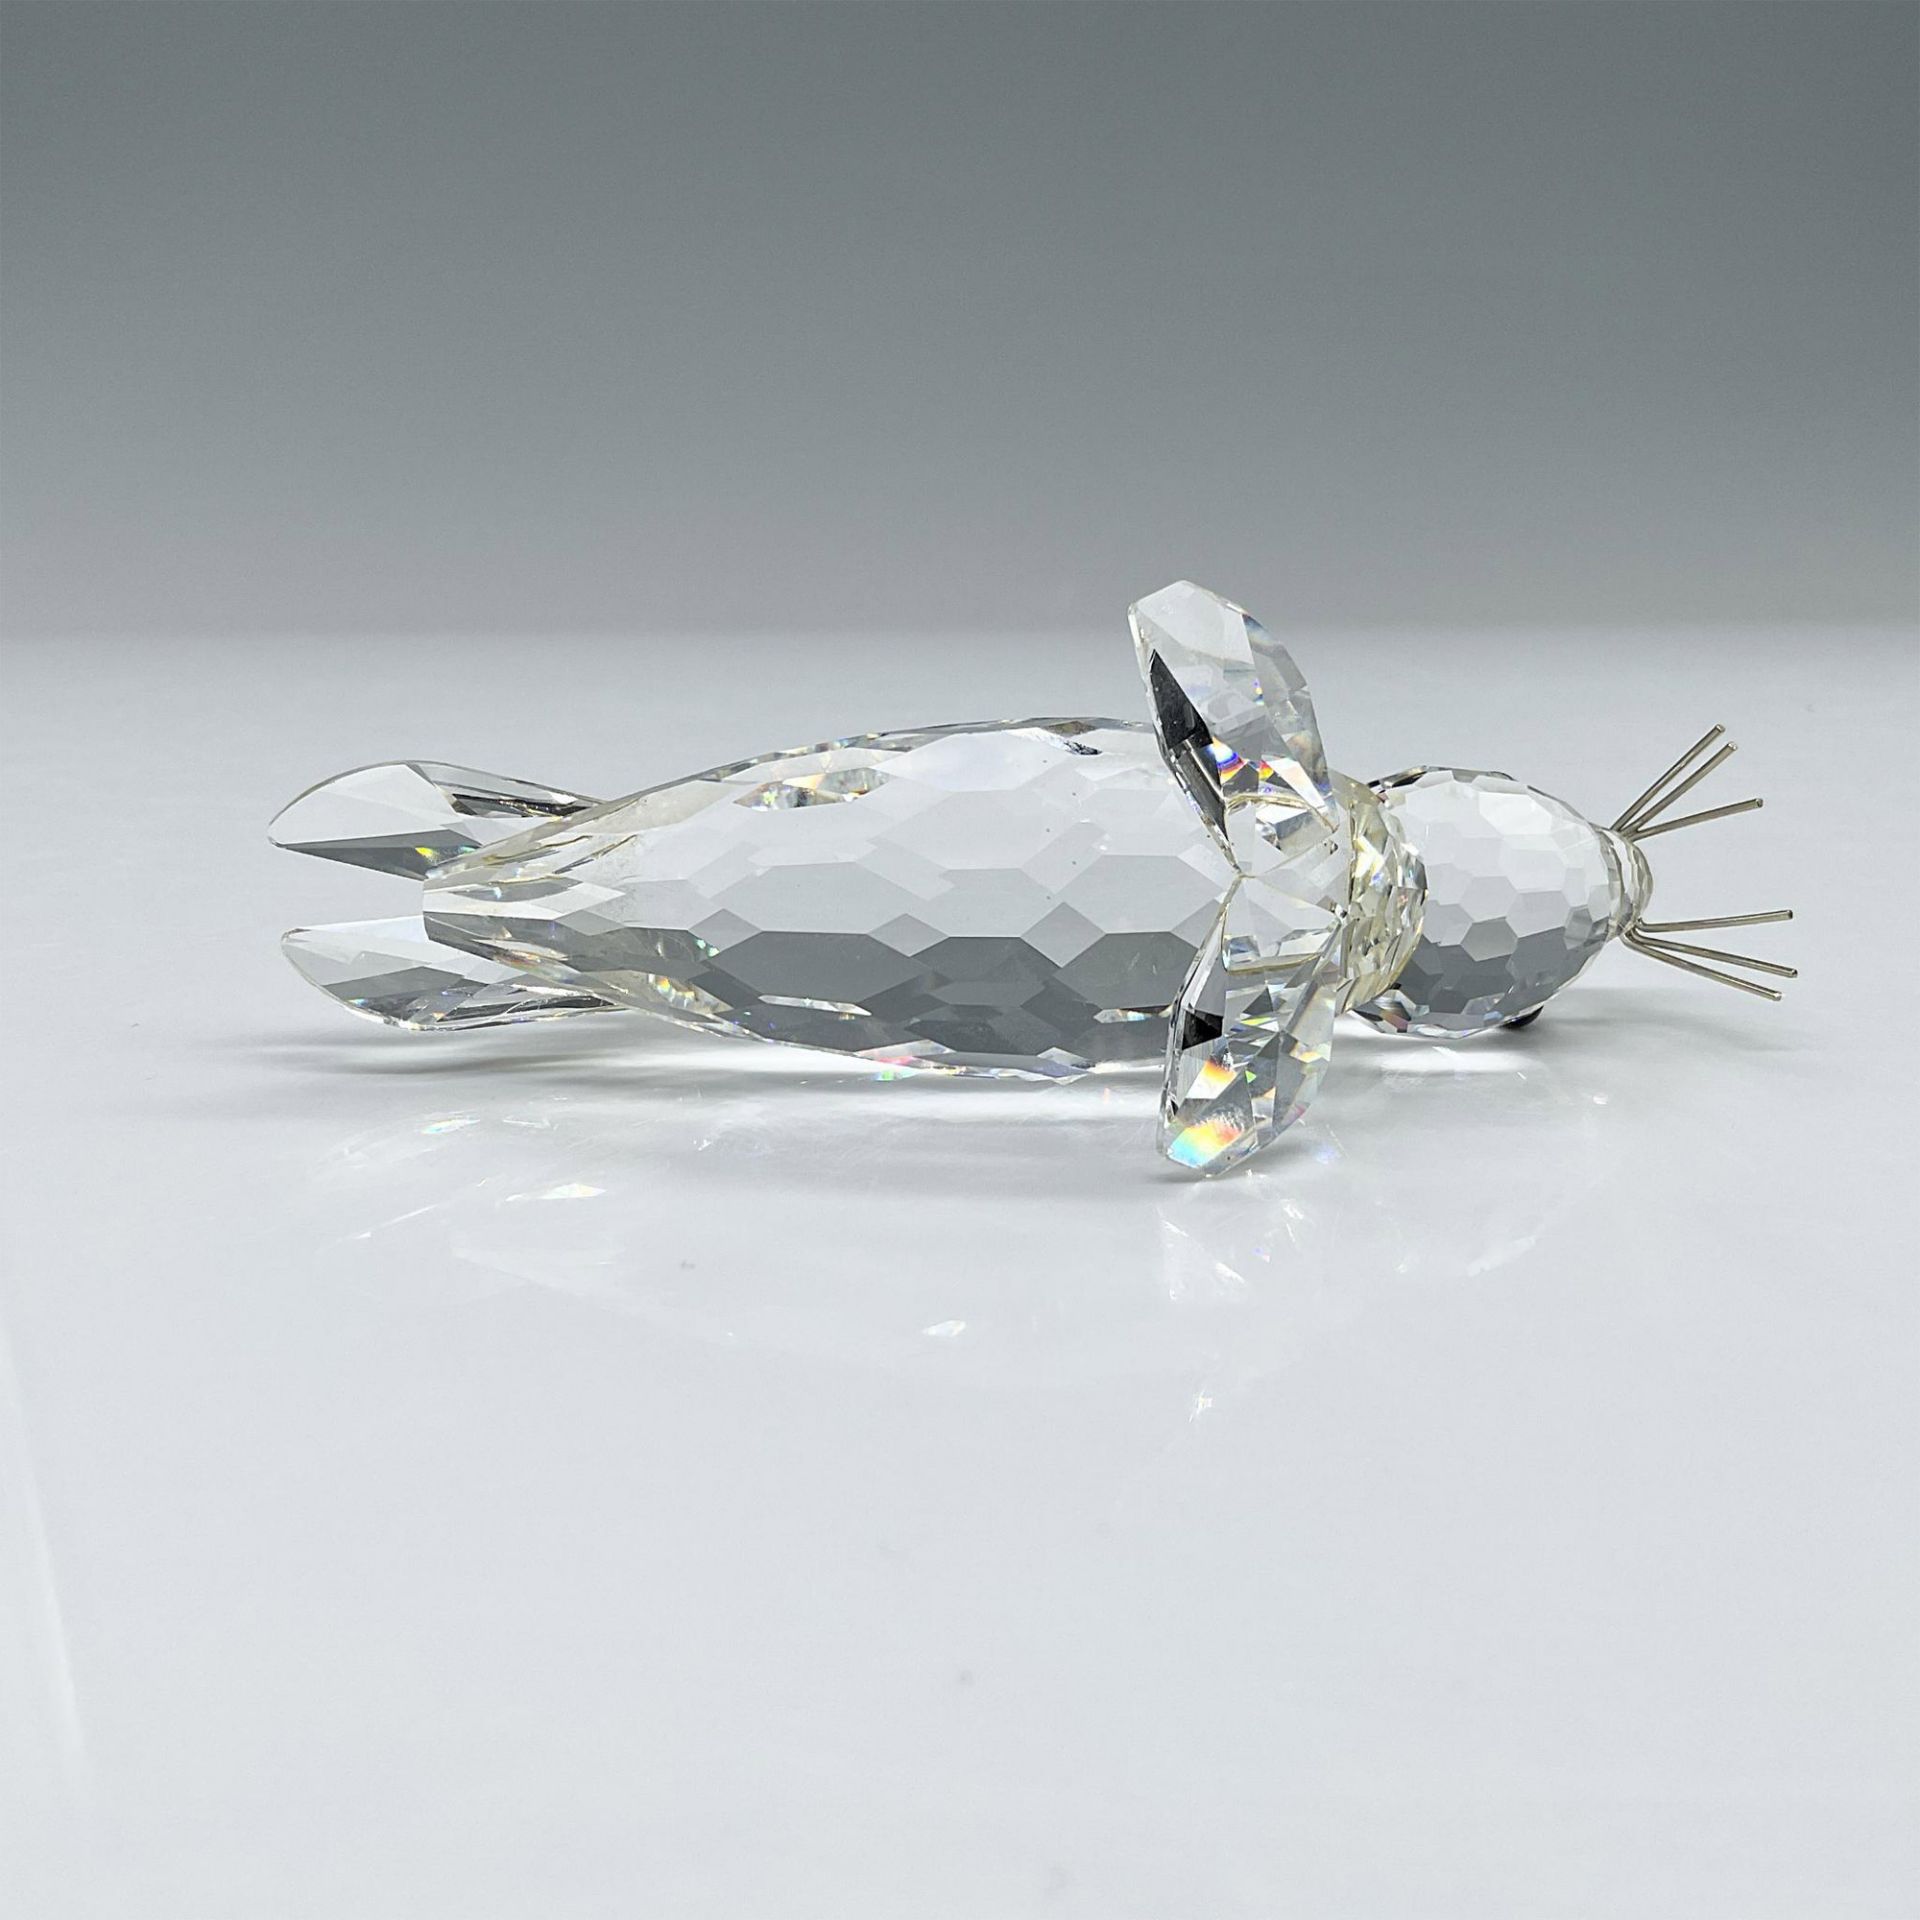 Swarovski Silver Crystal Figurine, Seal with Silver Whiskers - Image 3 of 4